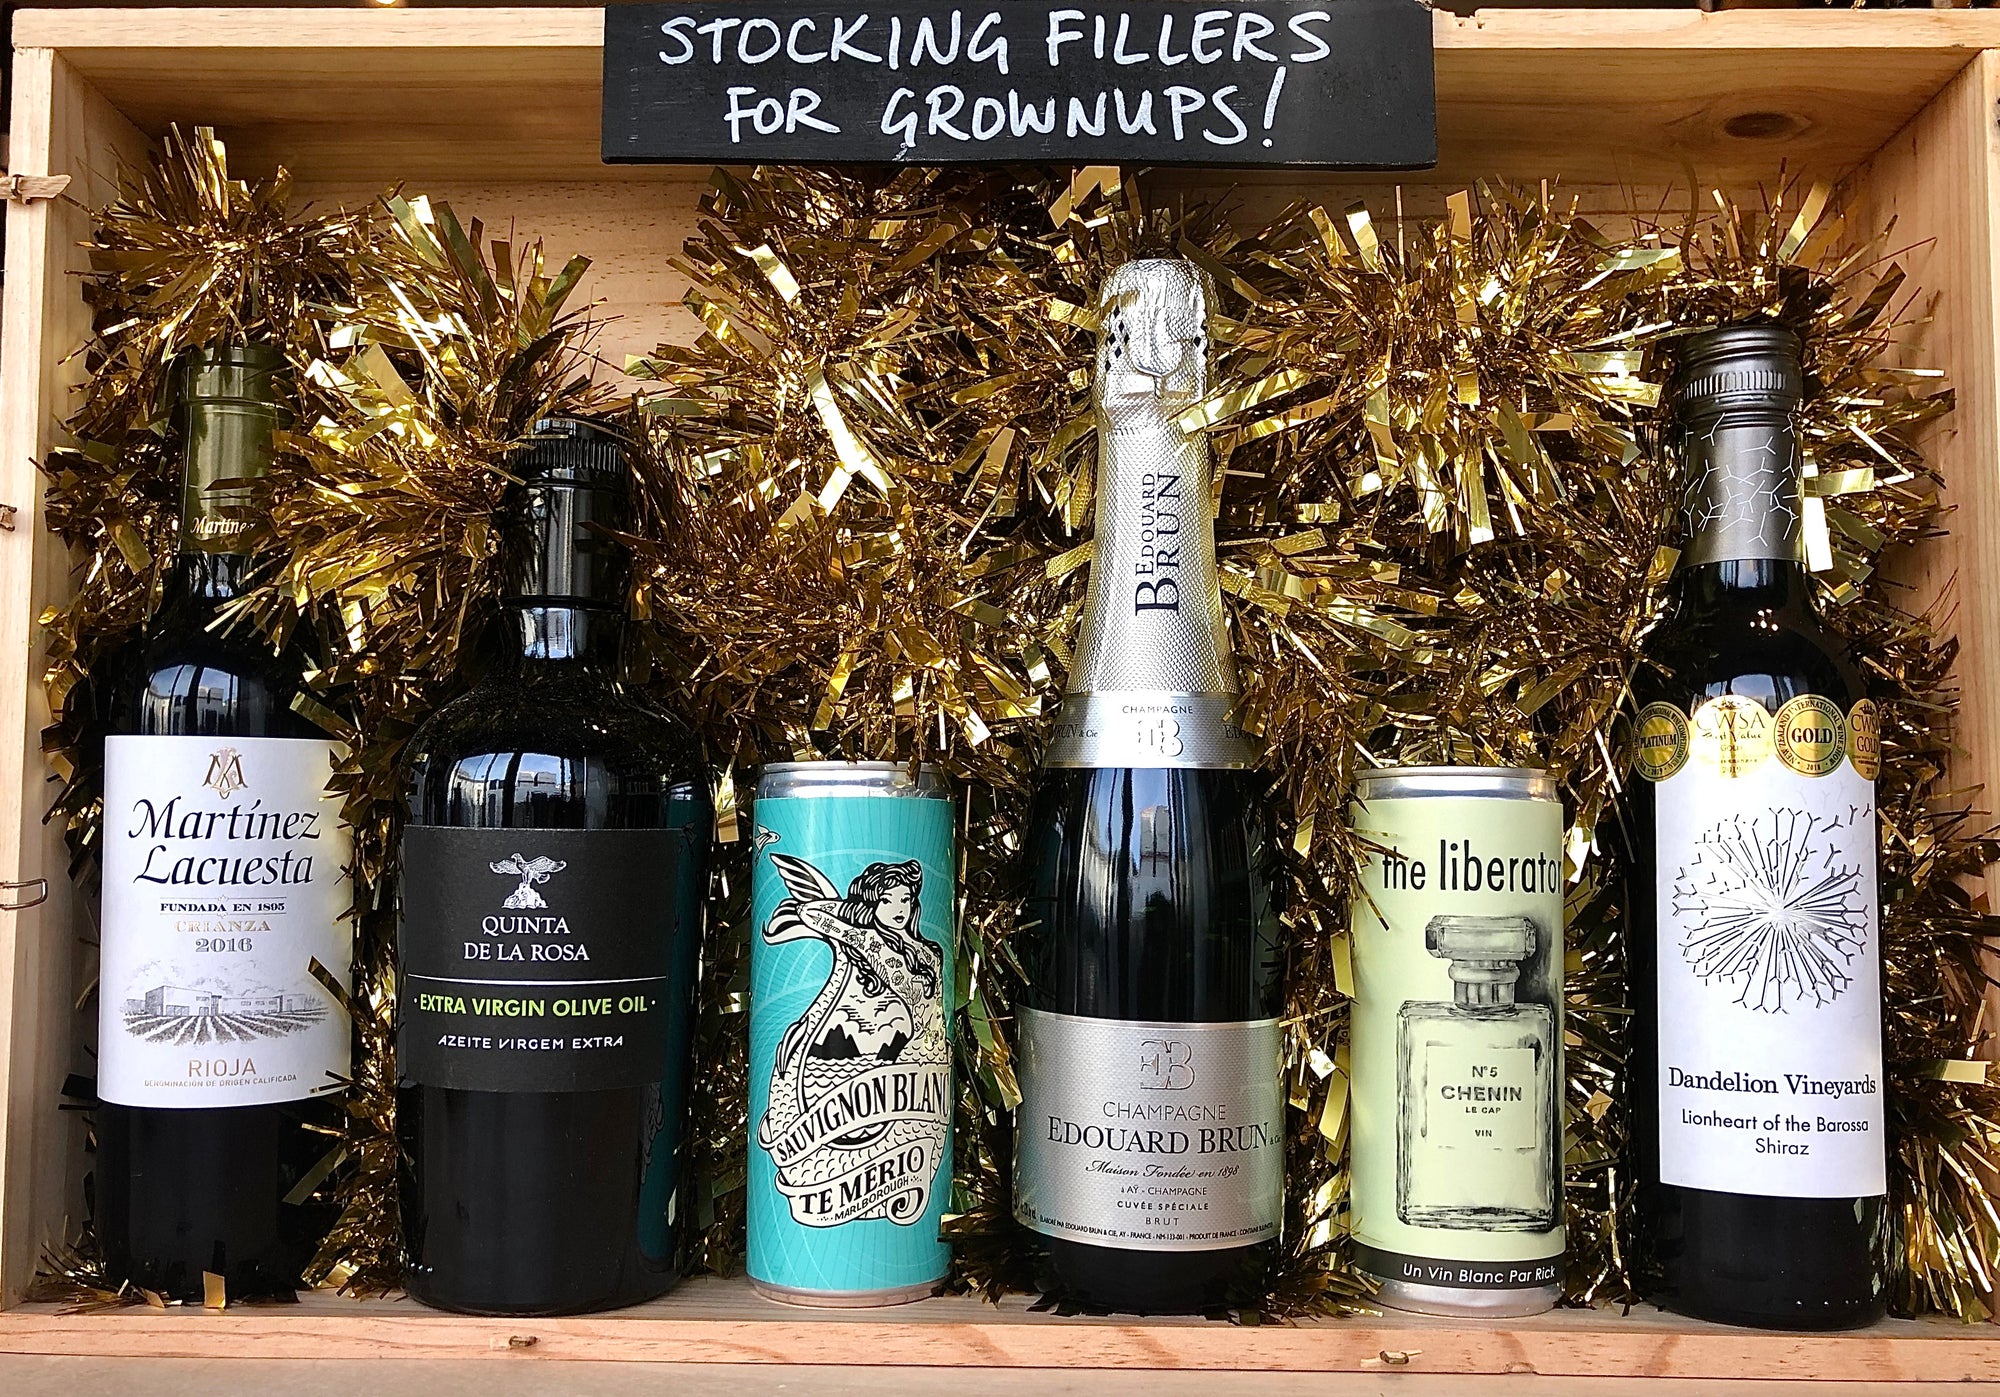 Butlers stocking fillers and gifts